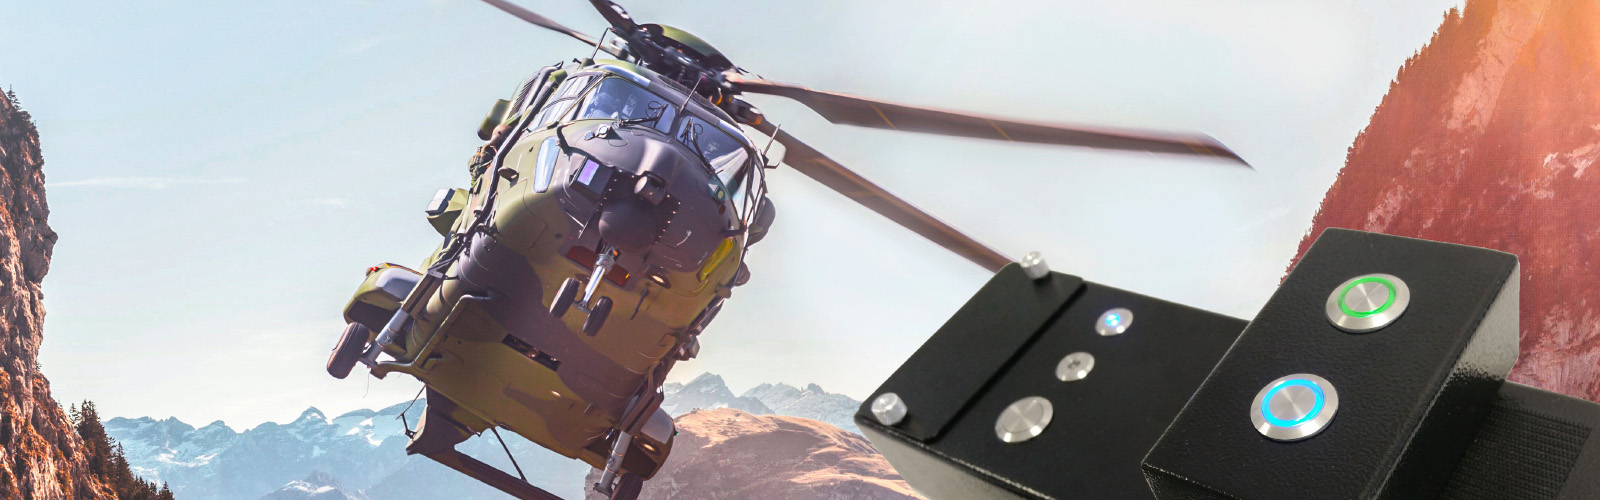 Quickdrop control system allows helicopter cargo loads to be remotely released .In control and instrumentation